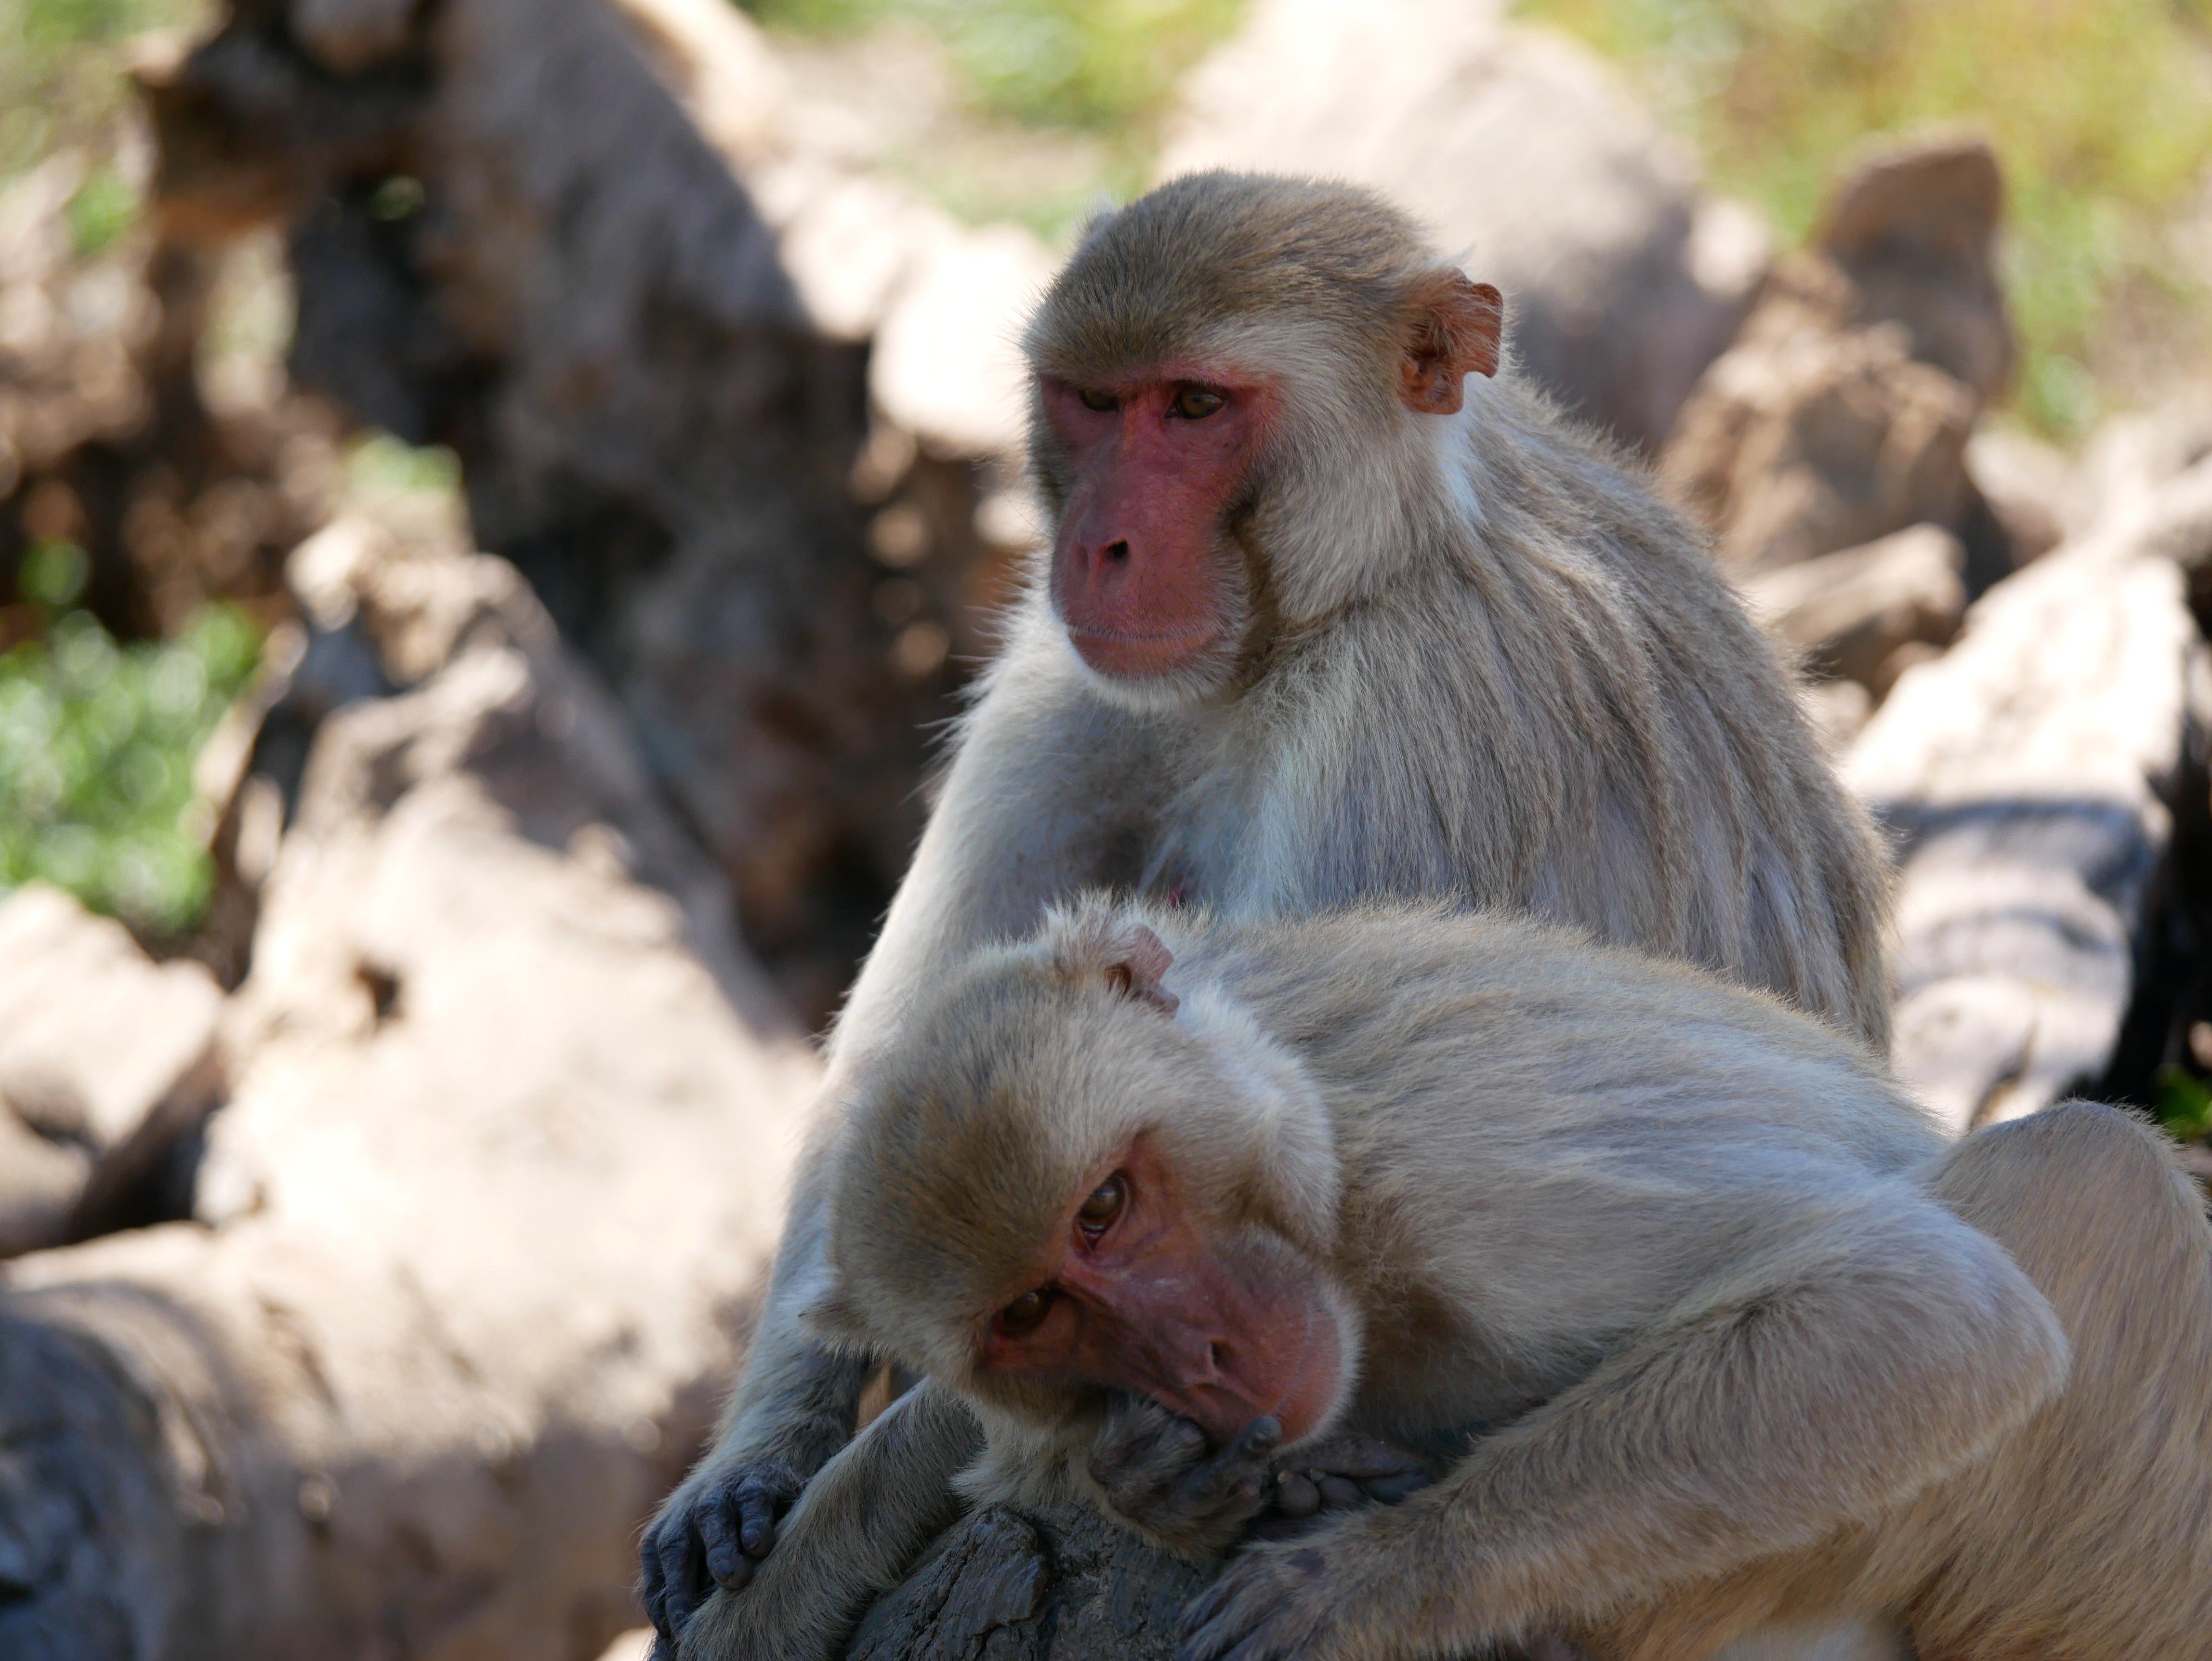 Male Monkeys Have More Sex with Other Males Than with Females in This  Well-Studied Group | Scientific American